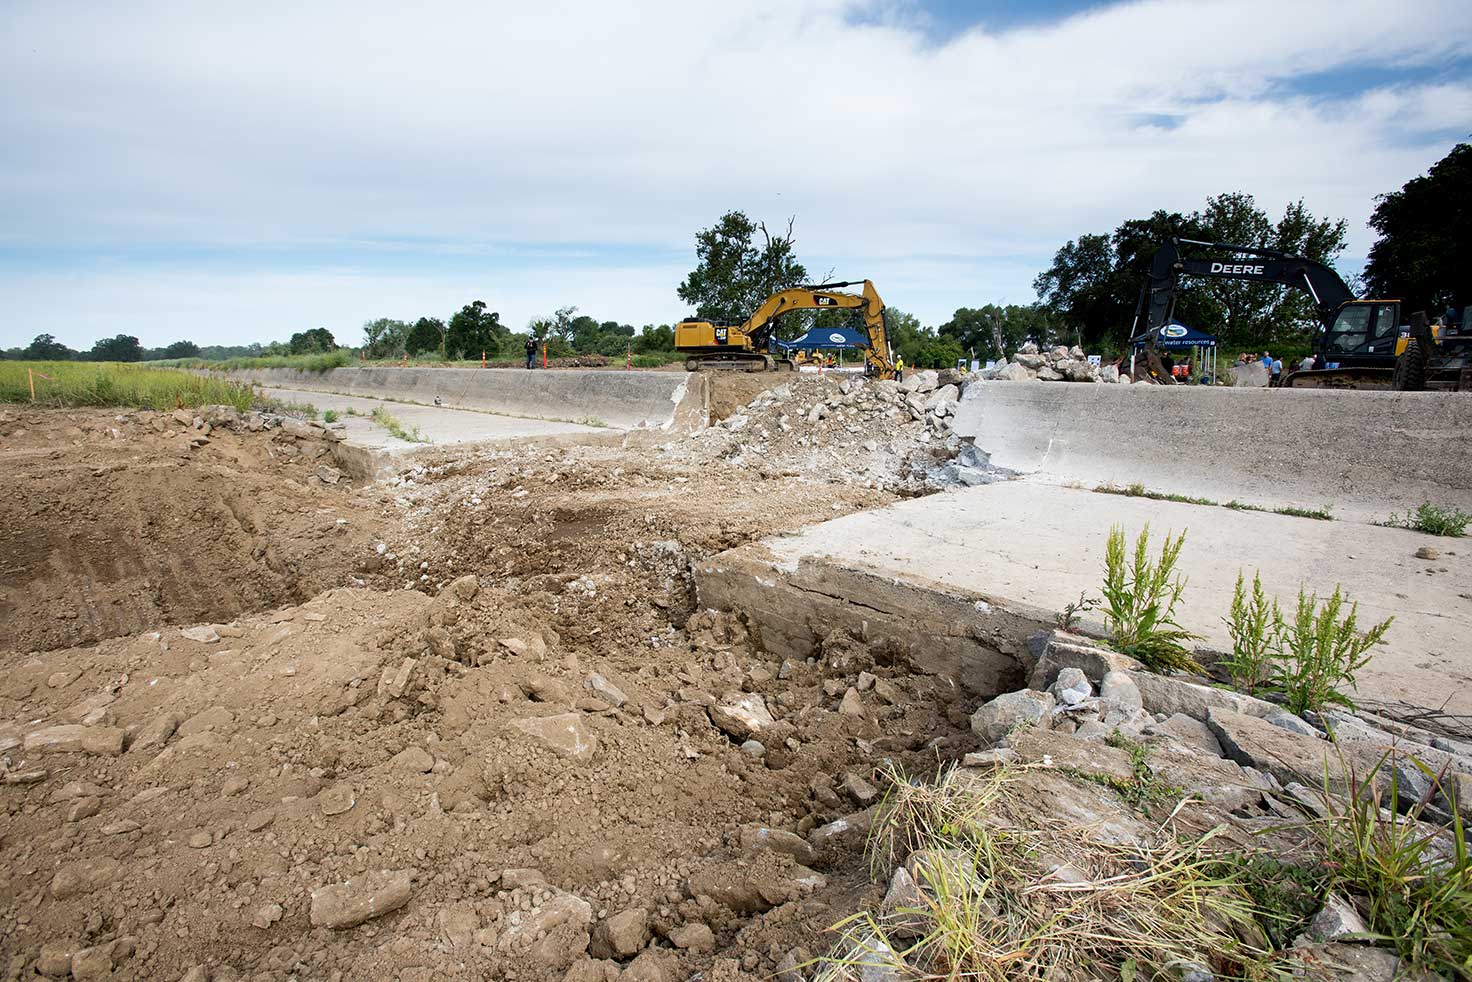 Photo 2: Demolition of the old fish ladder at the Fremont Weir began May 29, 2018. Photo courtesy of Department of Water Resources (Kelly M. Grow)